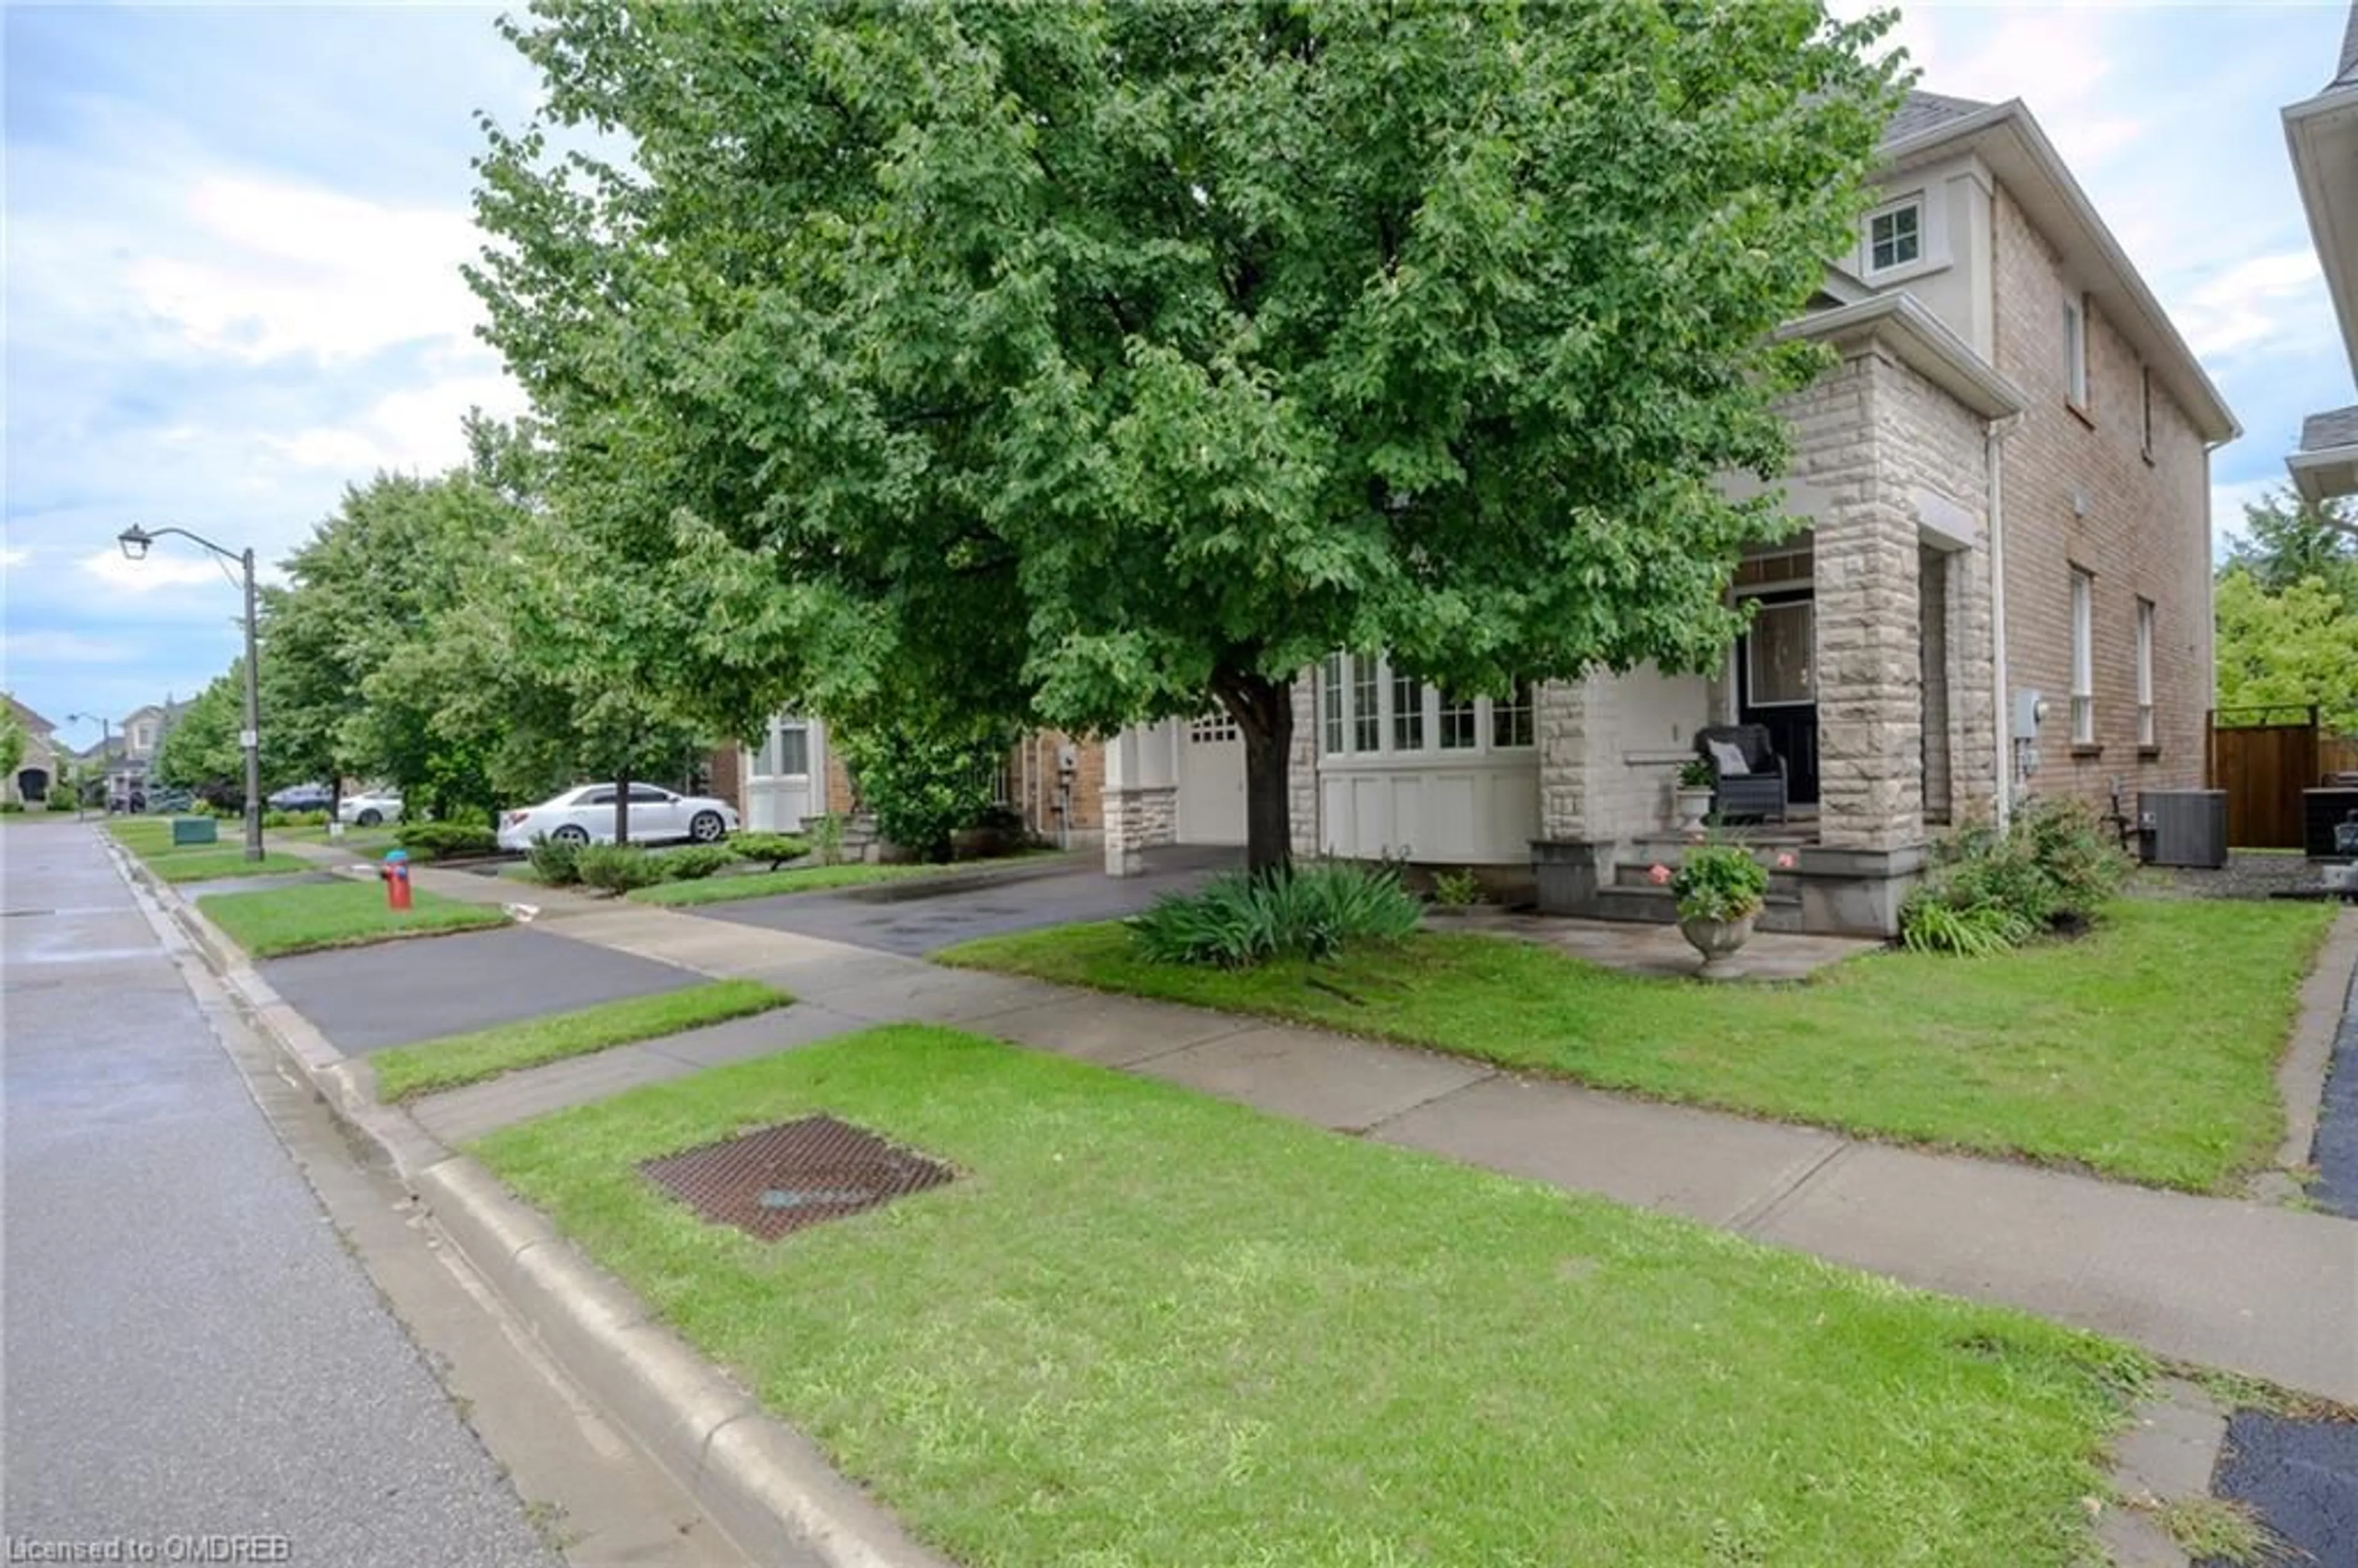 Street view for 2343 Calloway Dr, Oakville Ontario L6M 0B9